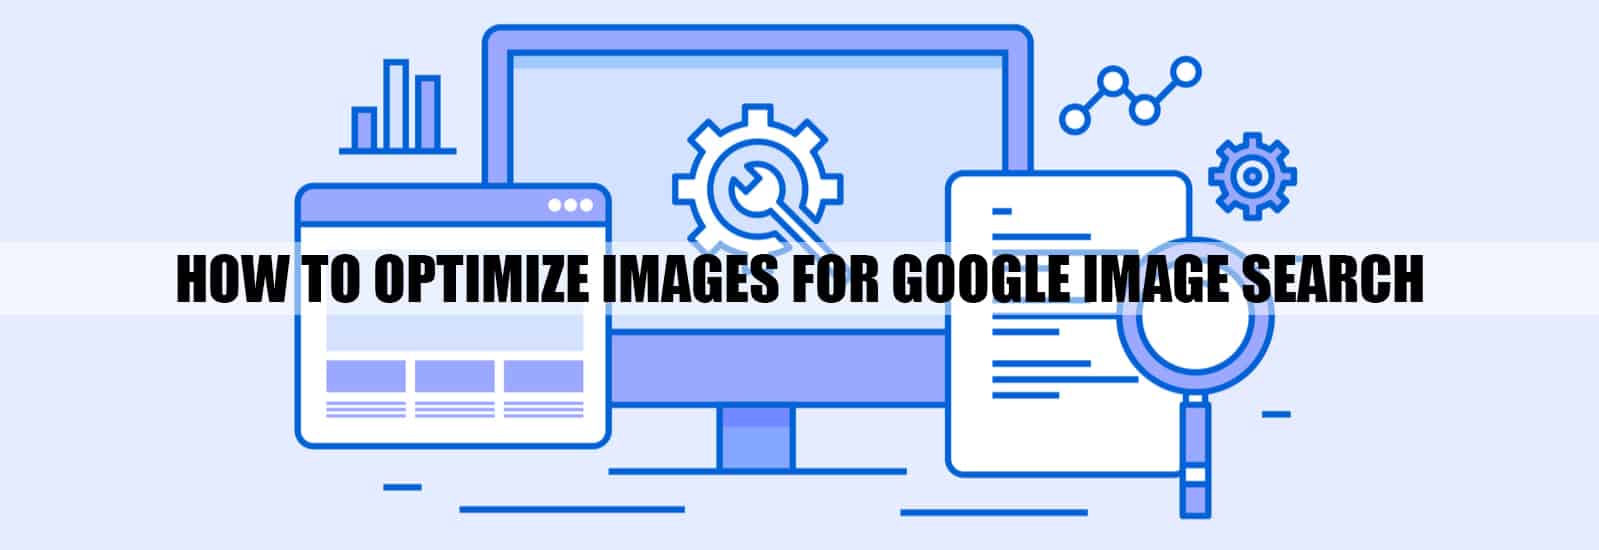 How To Optimize Images for Google Image Search